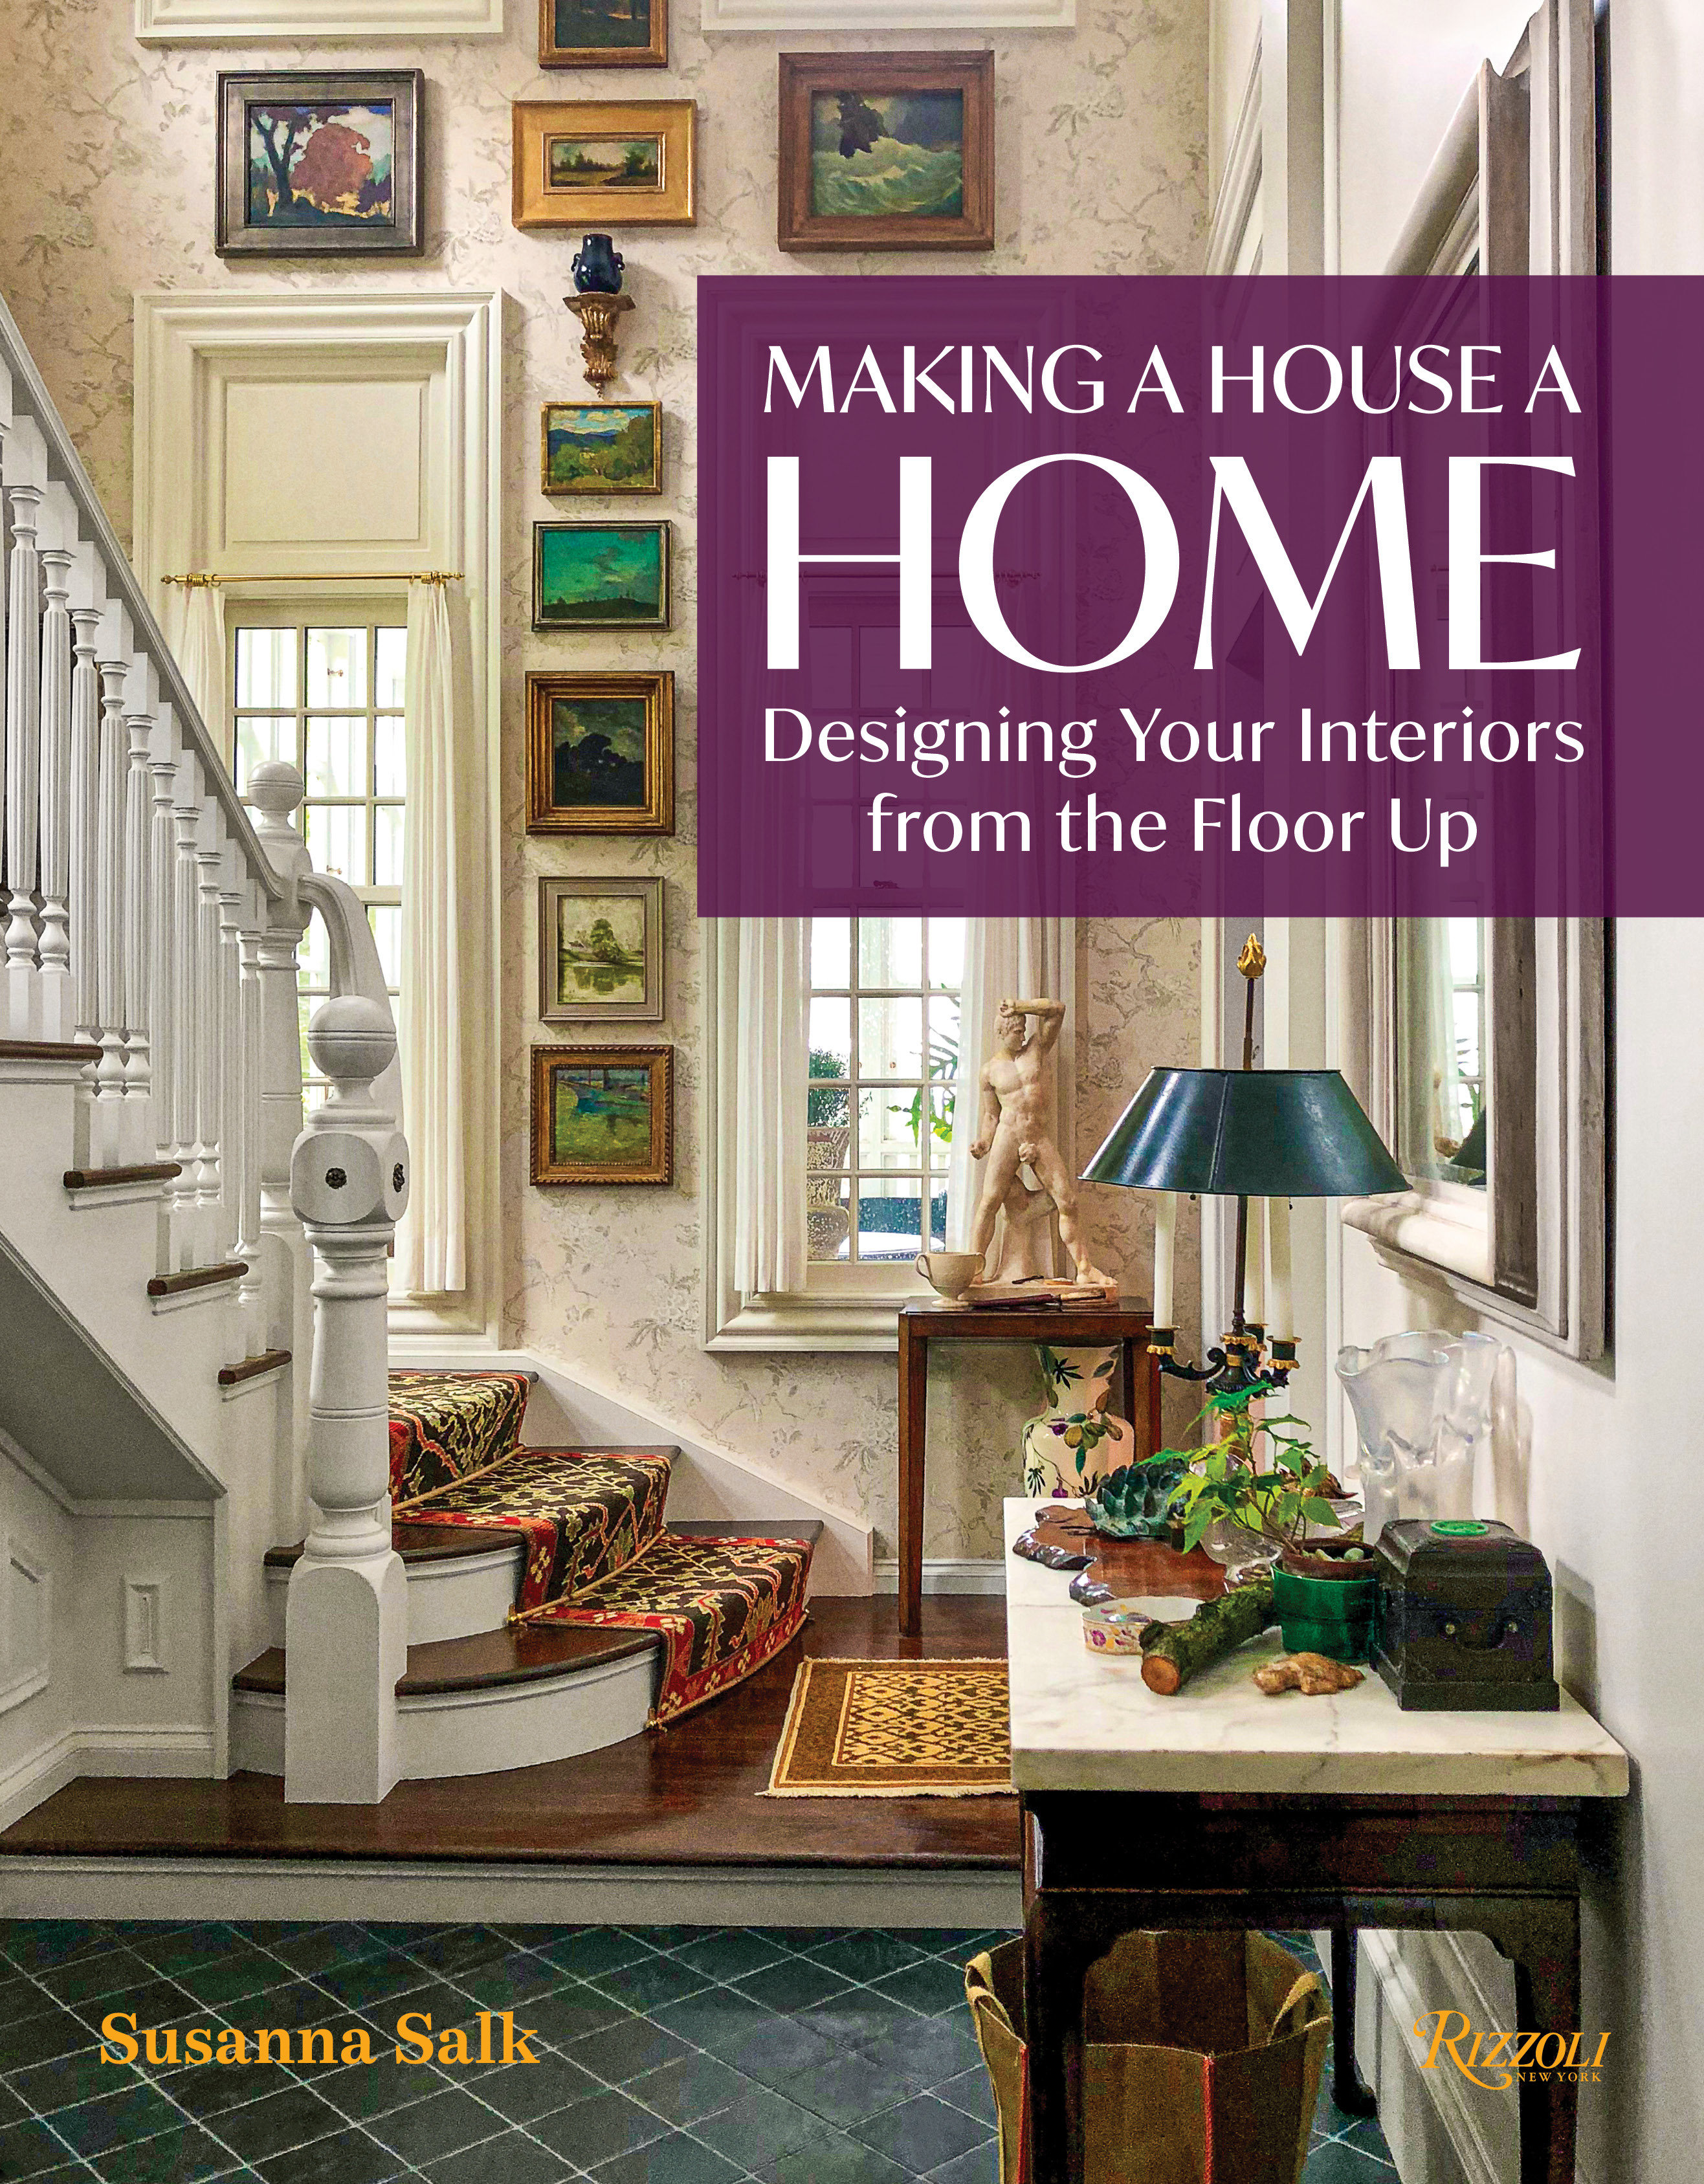 Making A House A Home (Hardcover Book)